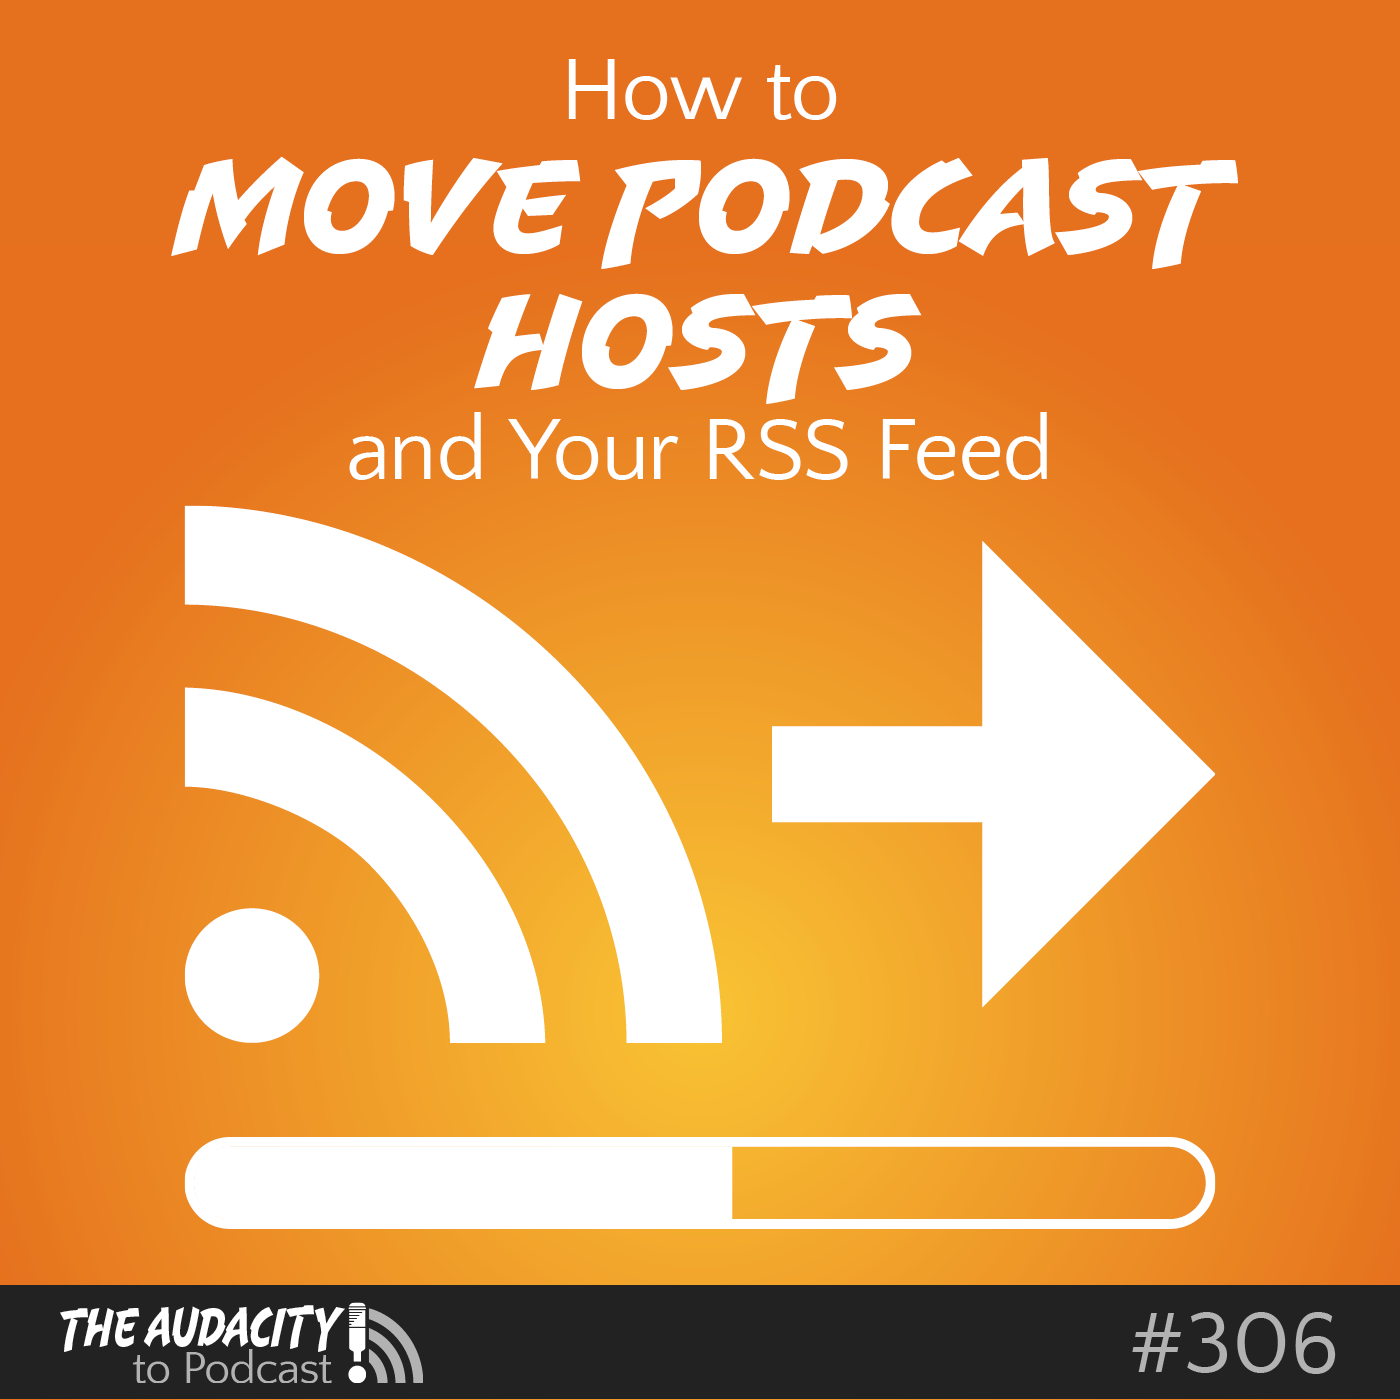 How to Move Podcast Hosts and Your RSS Feed